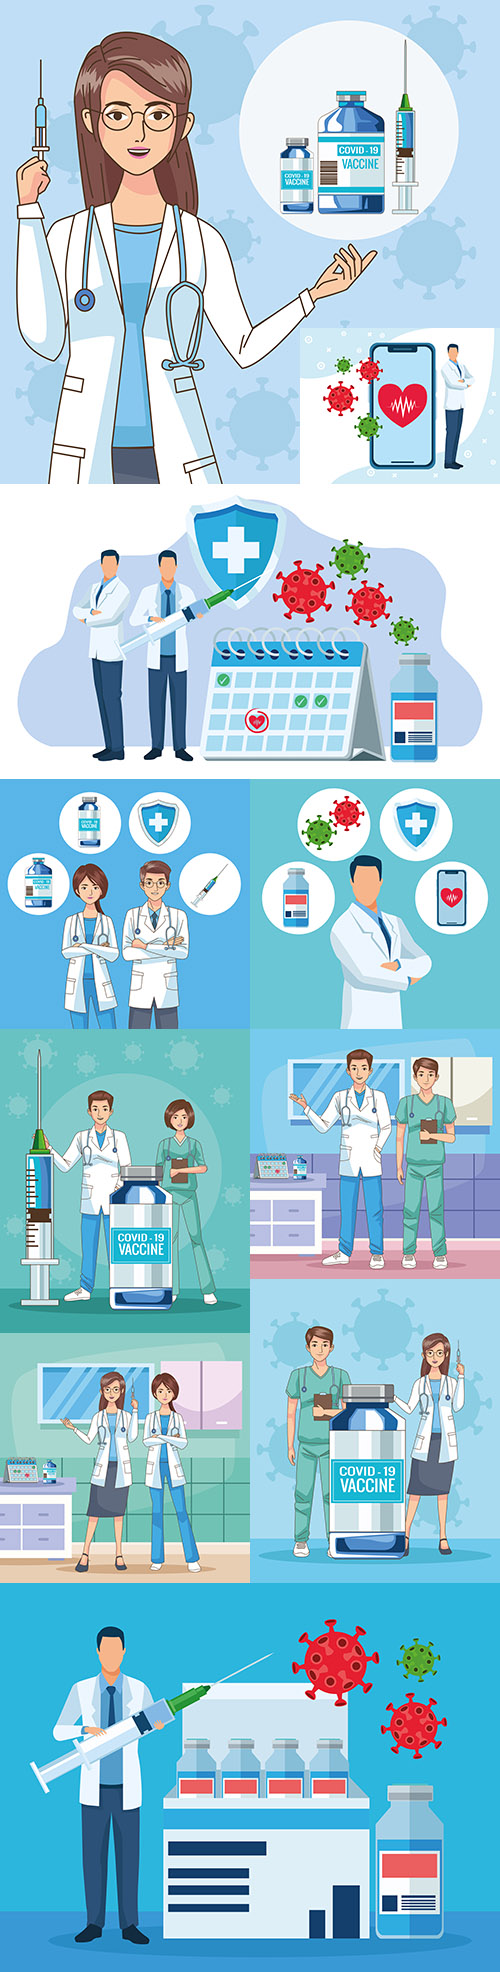 Doctors characters with vaccine illustration scene in hospital
